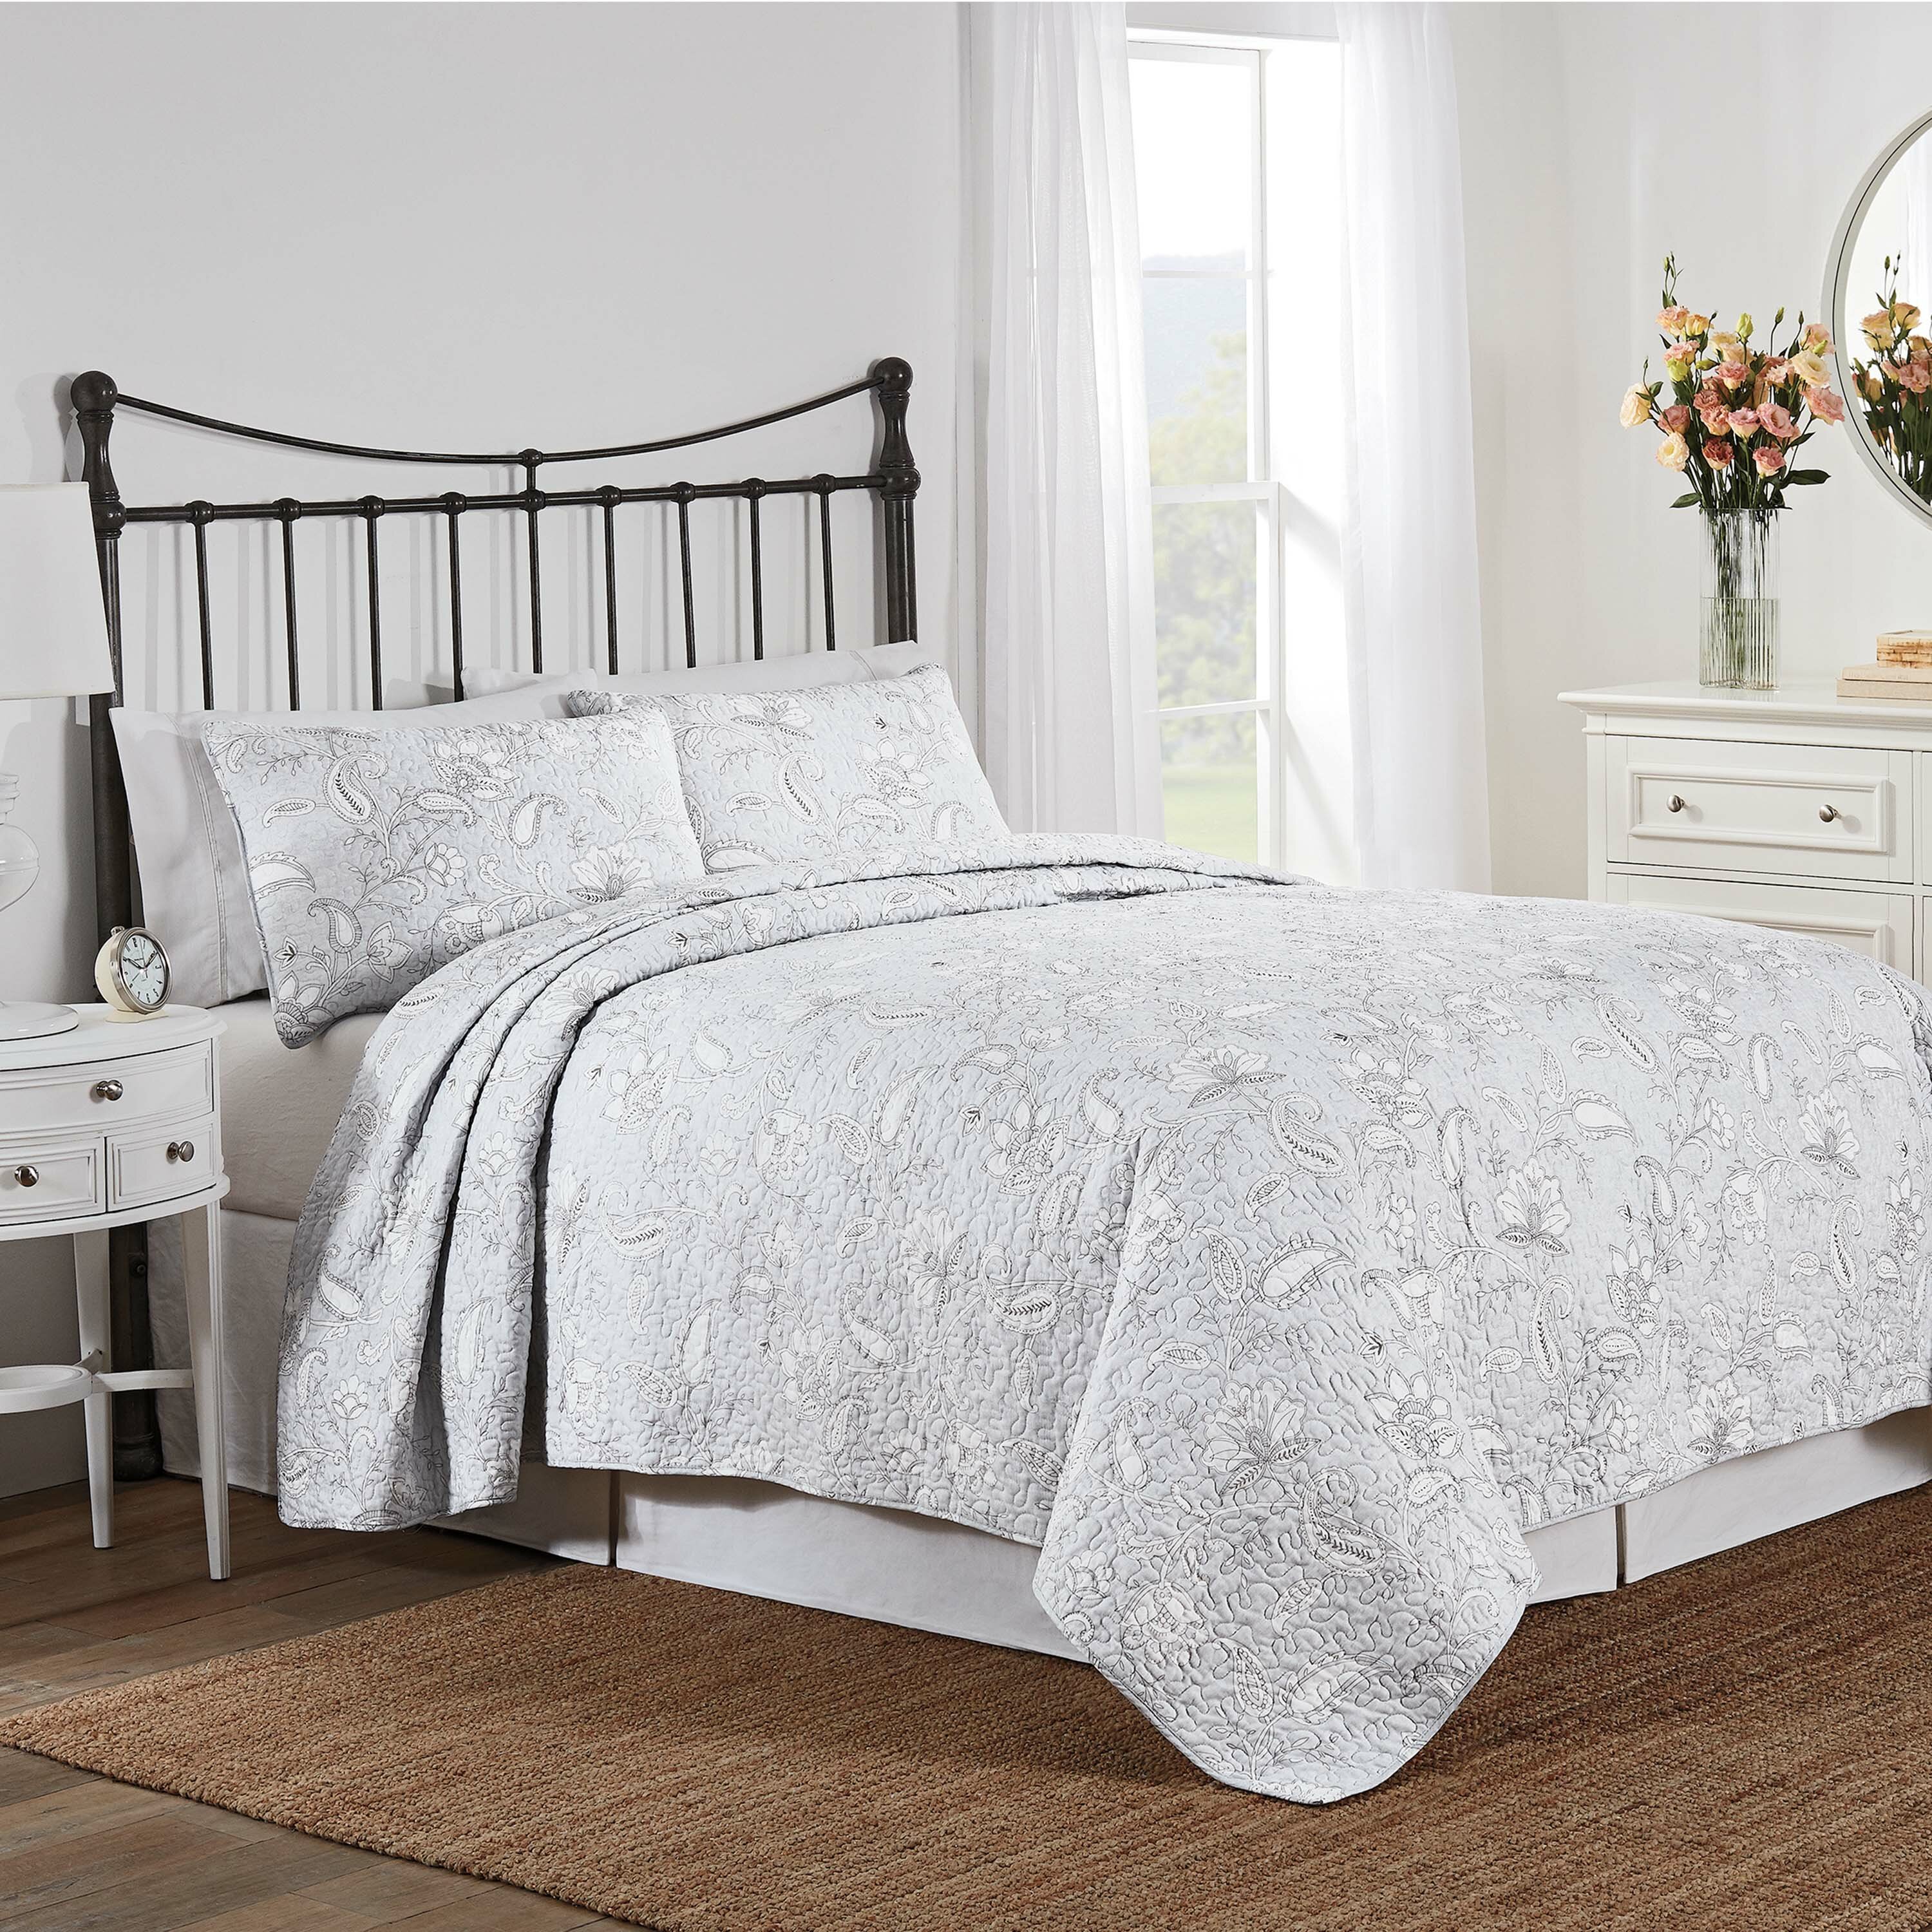 Ophelia Co Nostalgia Home Tiffany Full Queen Light Grey Quilt